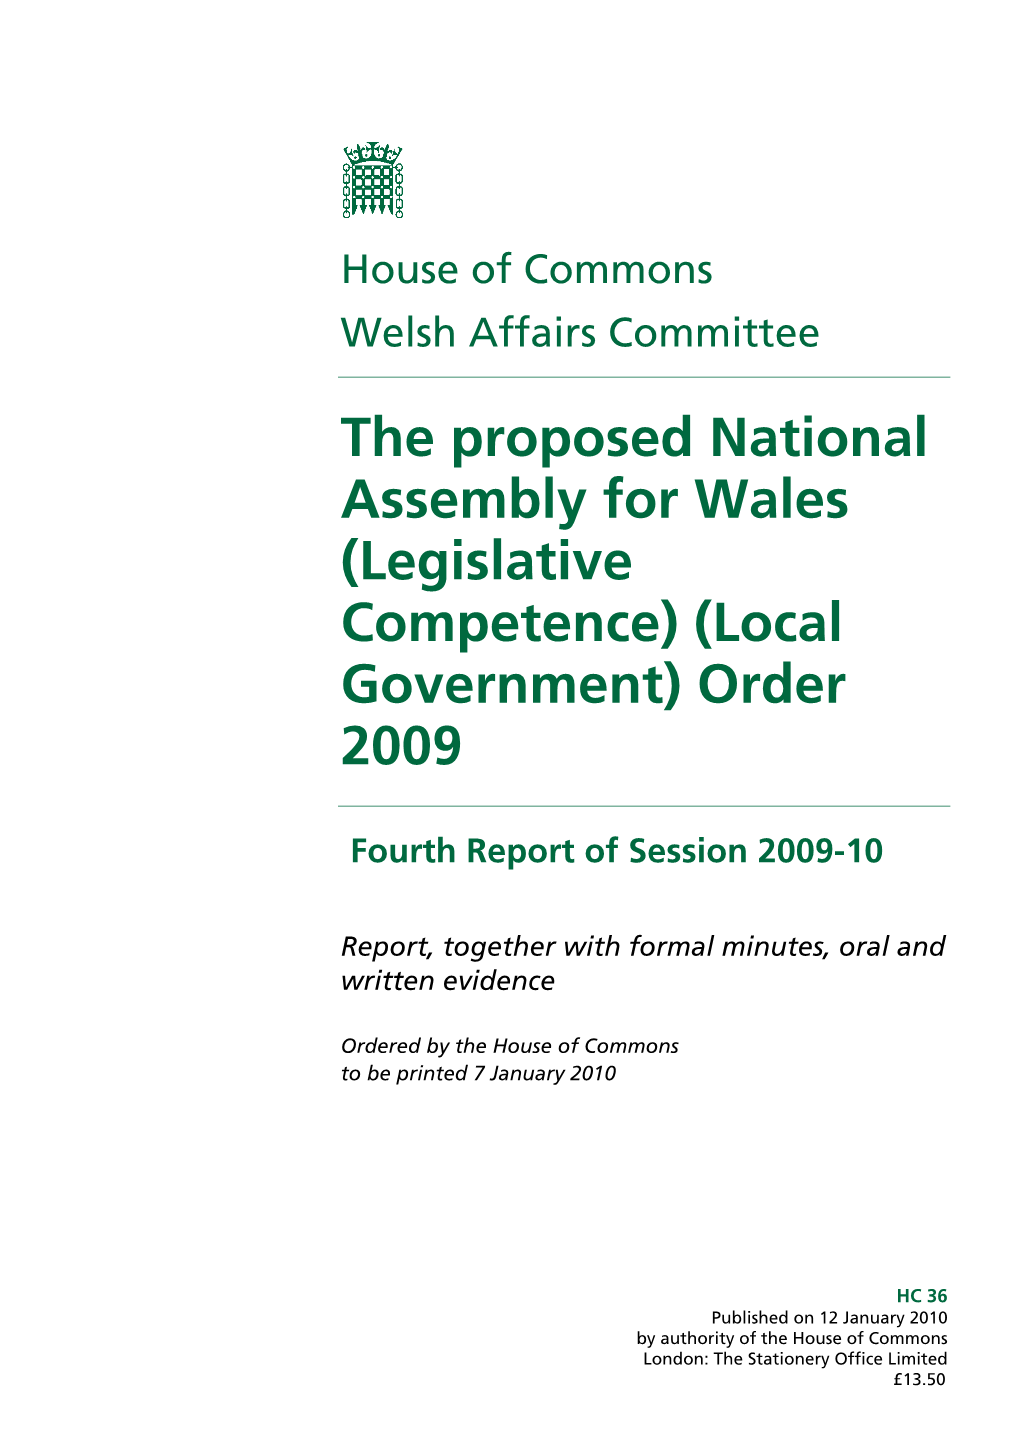 The Proposed National Assembly for Wales (Legislative Competence) (Local Government) Order 2009